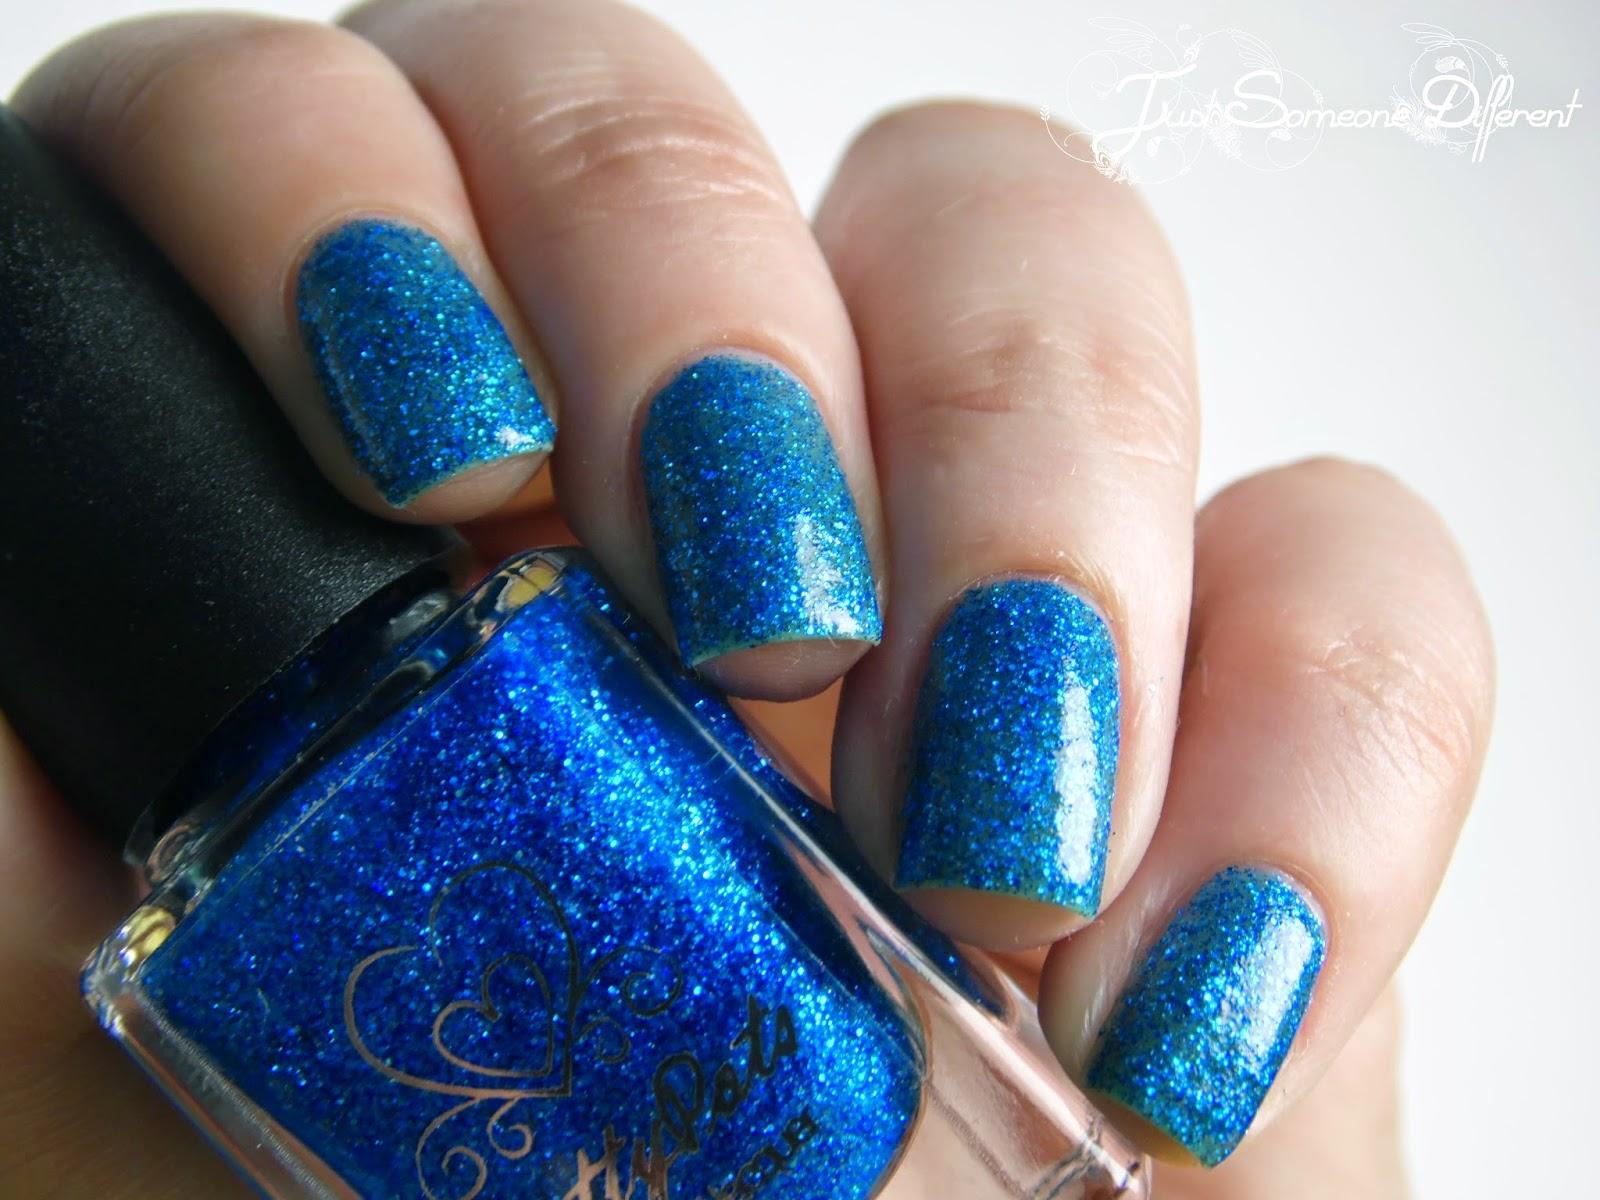 PrettyPotsPolish - Wizard of Oz , Core and Out of this World collections